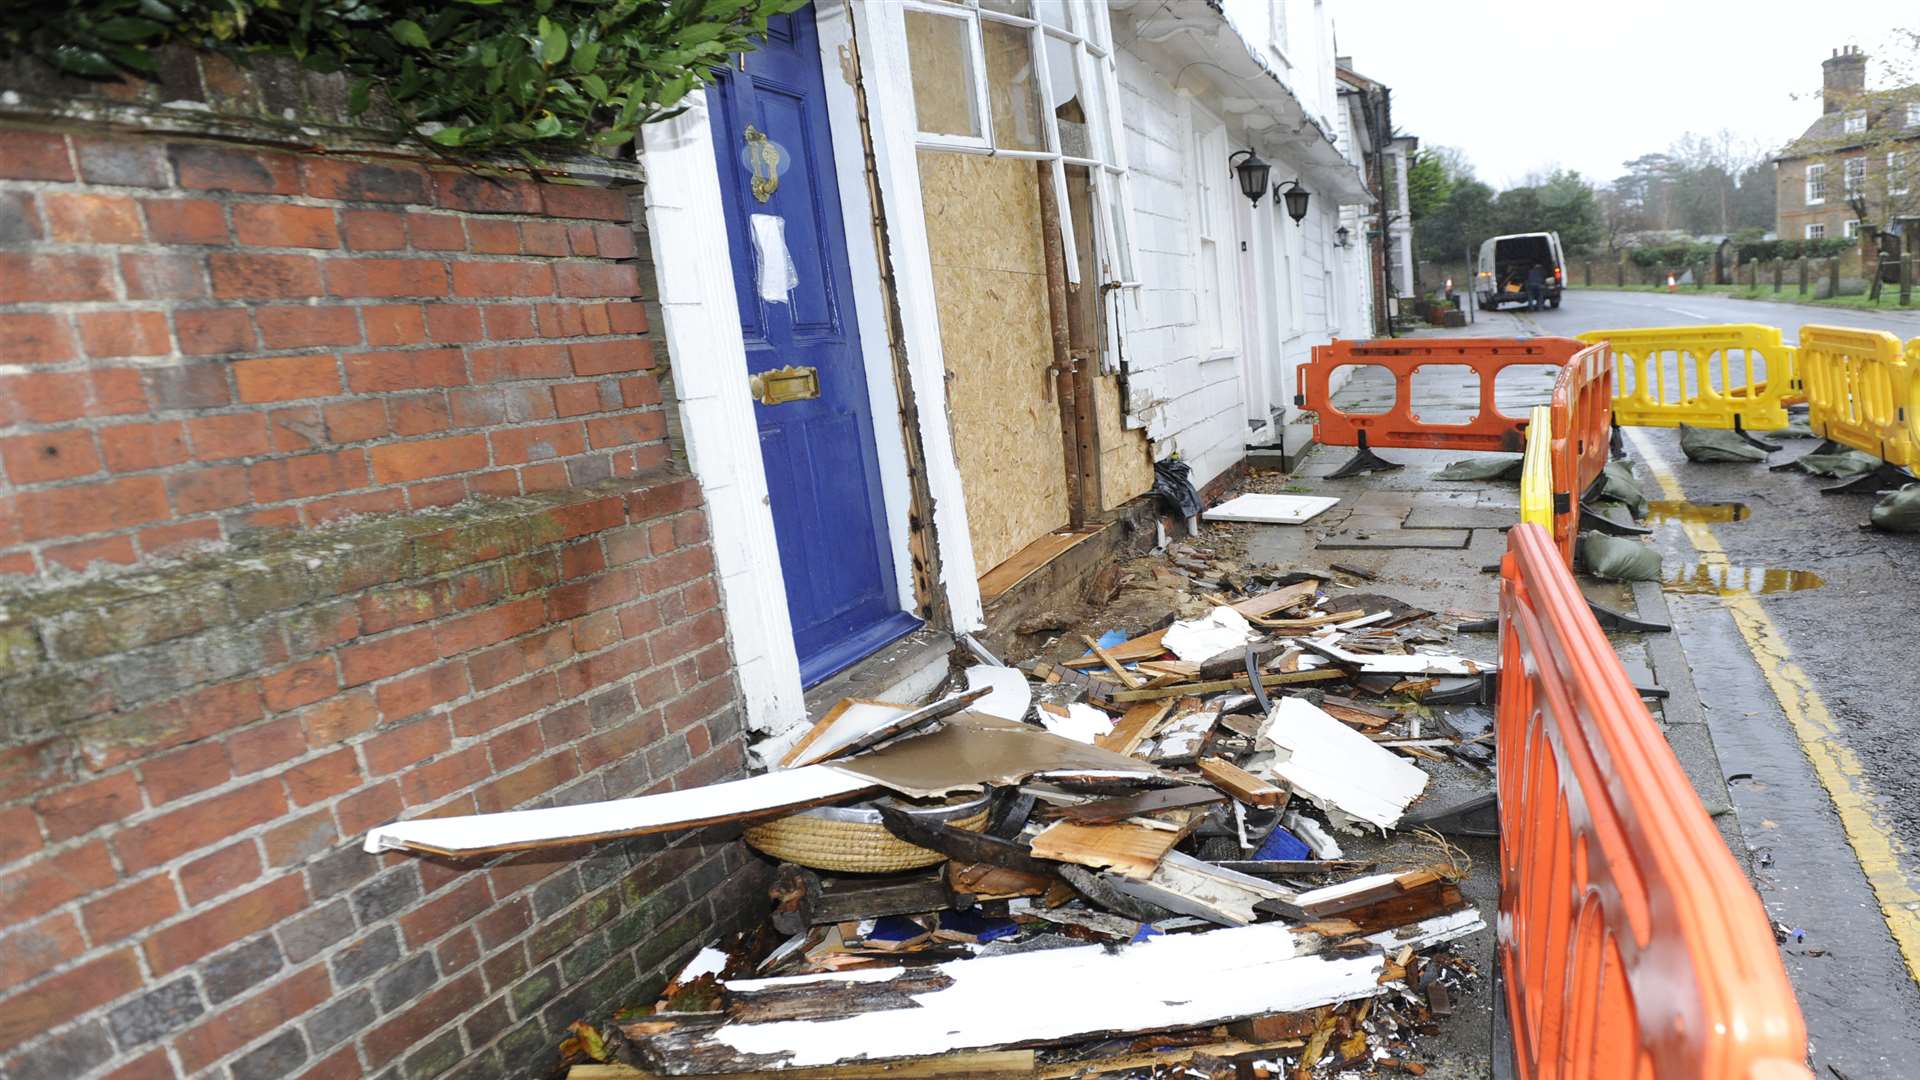 The Tenterden street after the car crashed into the house